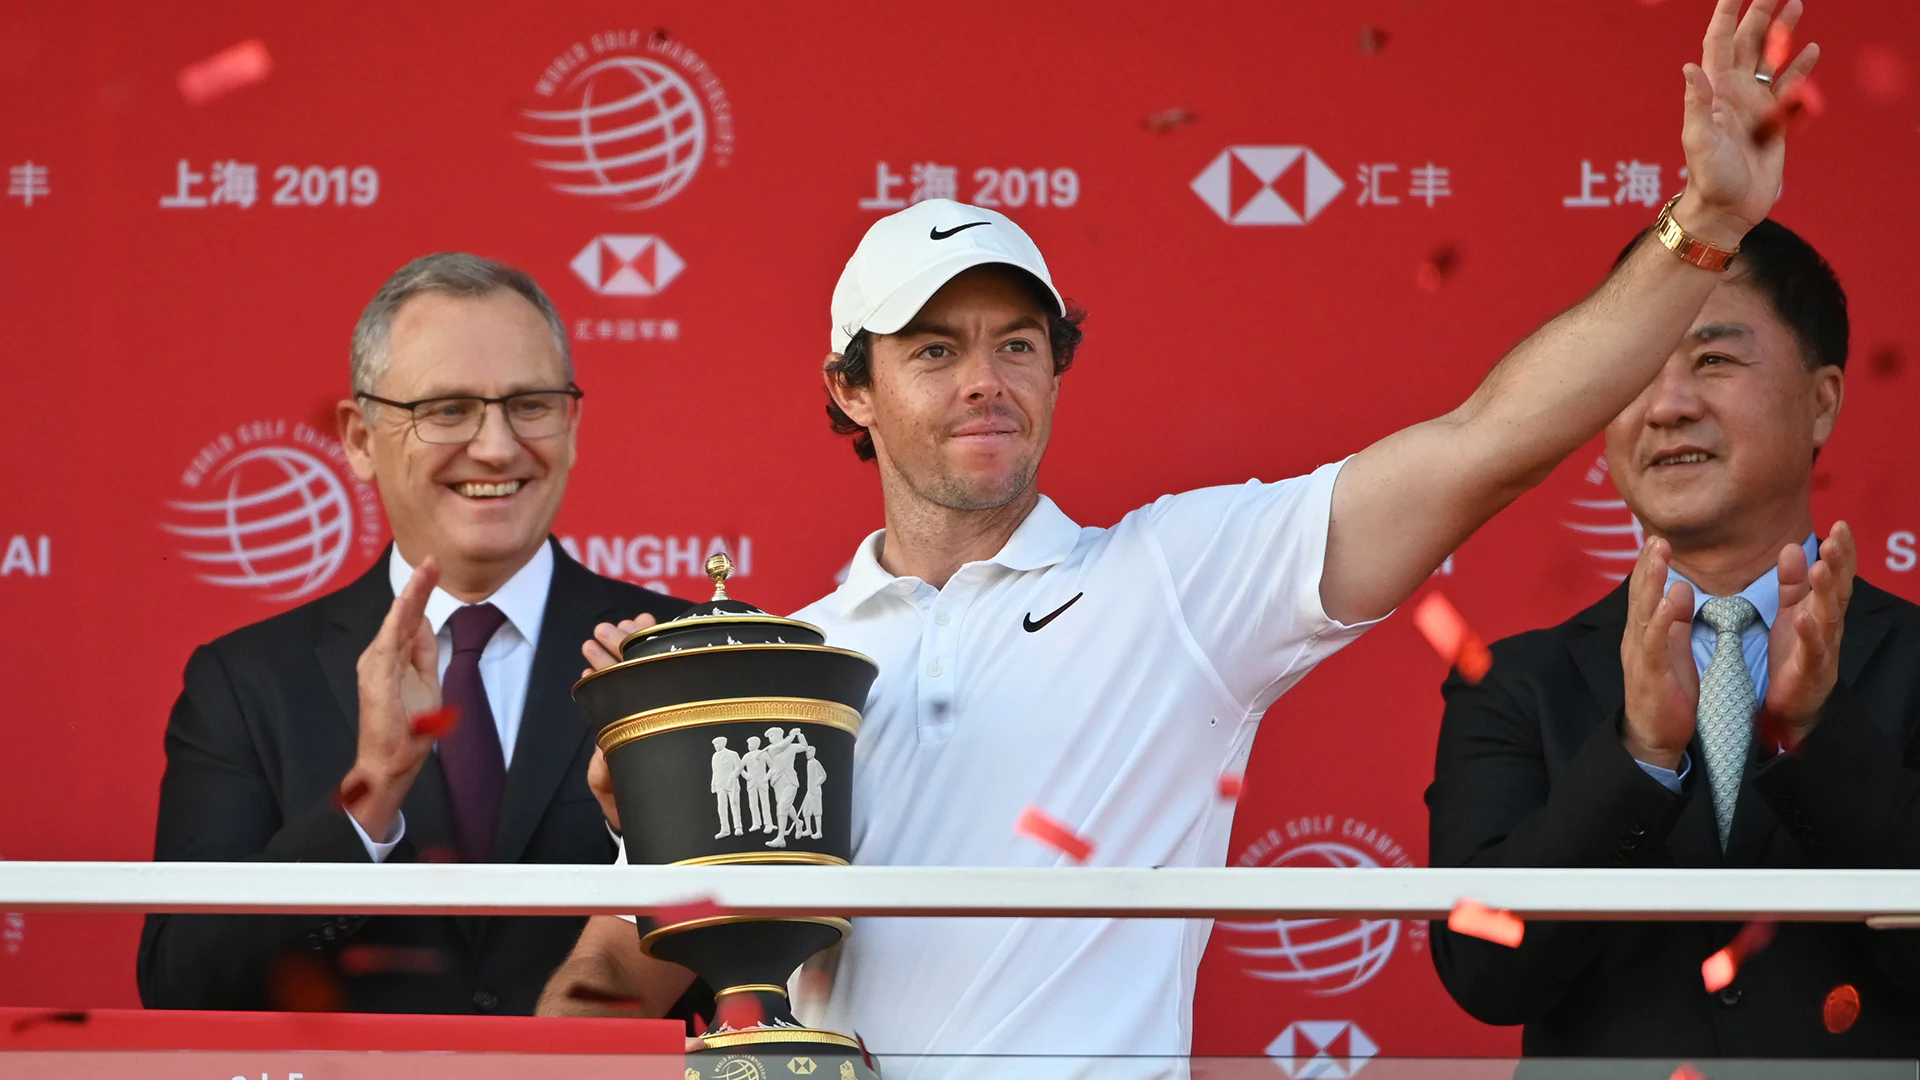 WGC-HSBC and LPGA Shanghai canceled as China will not stage international events